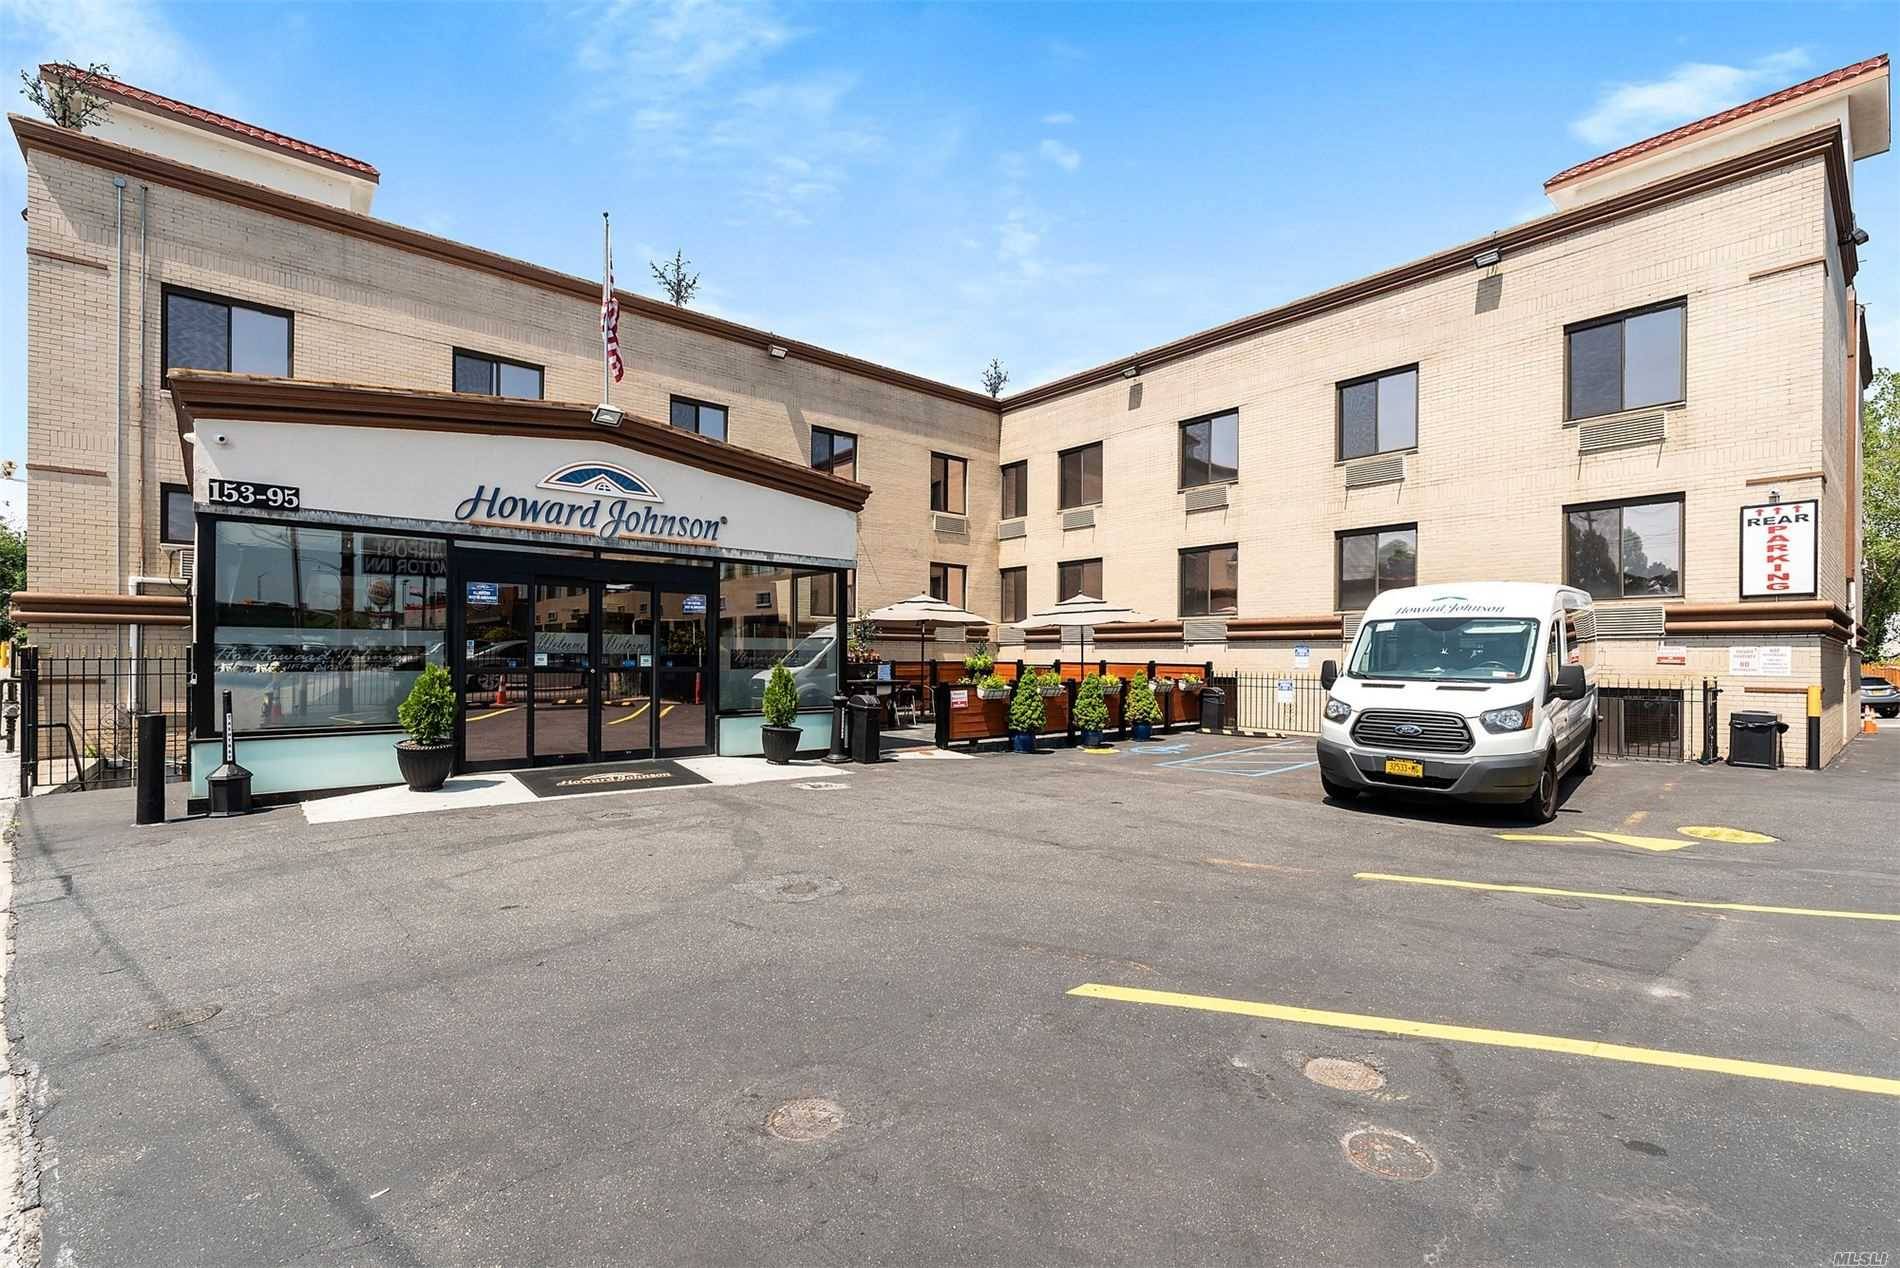 The OYO Hotel is conveniently located off the Belt Parkway with easy access to the excitement of NYC.